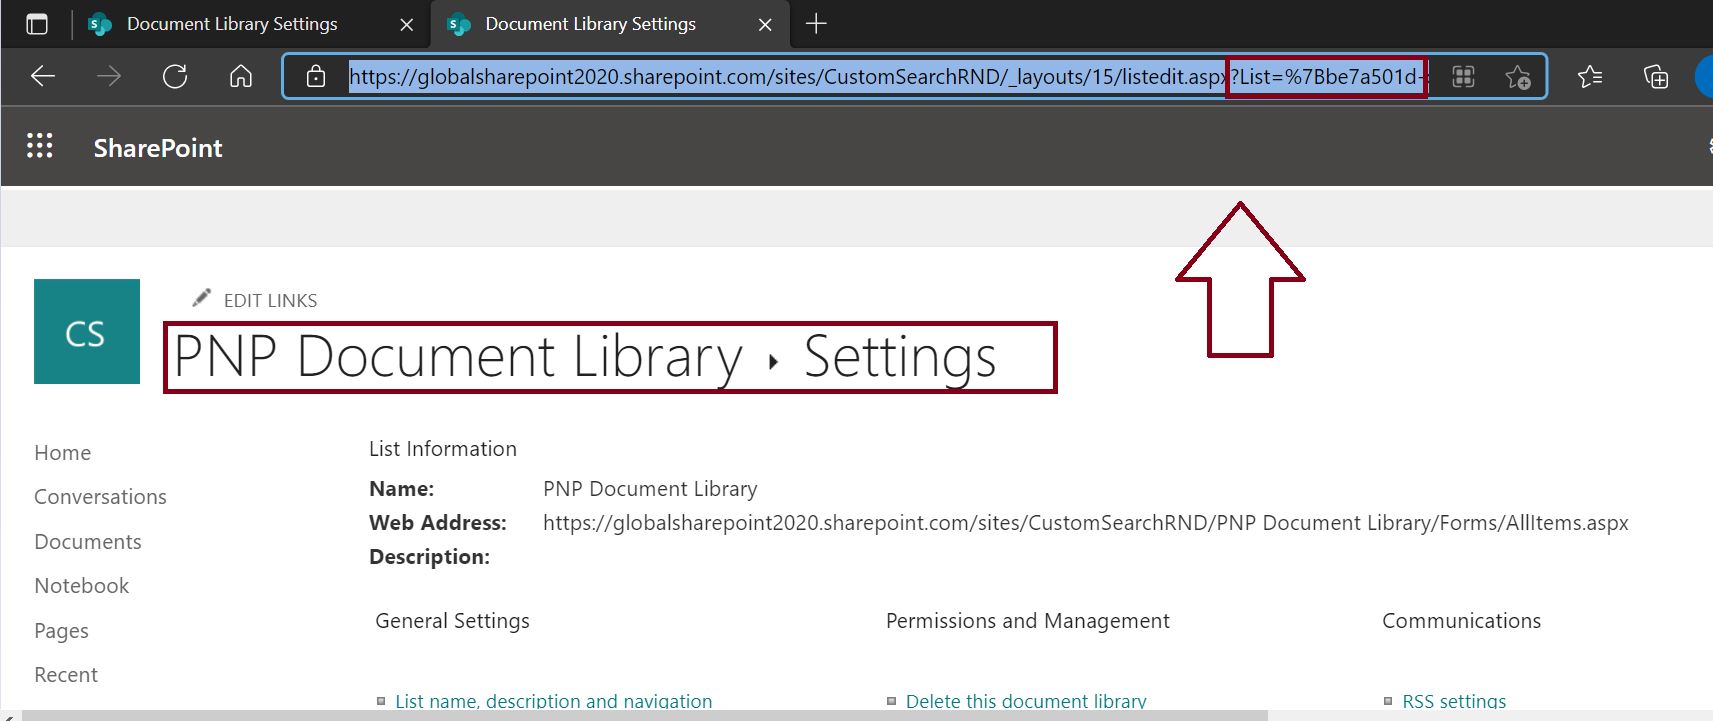 Get Document Library GUID ID from document library settings page in SharePoint